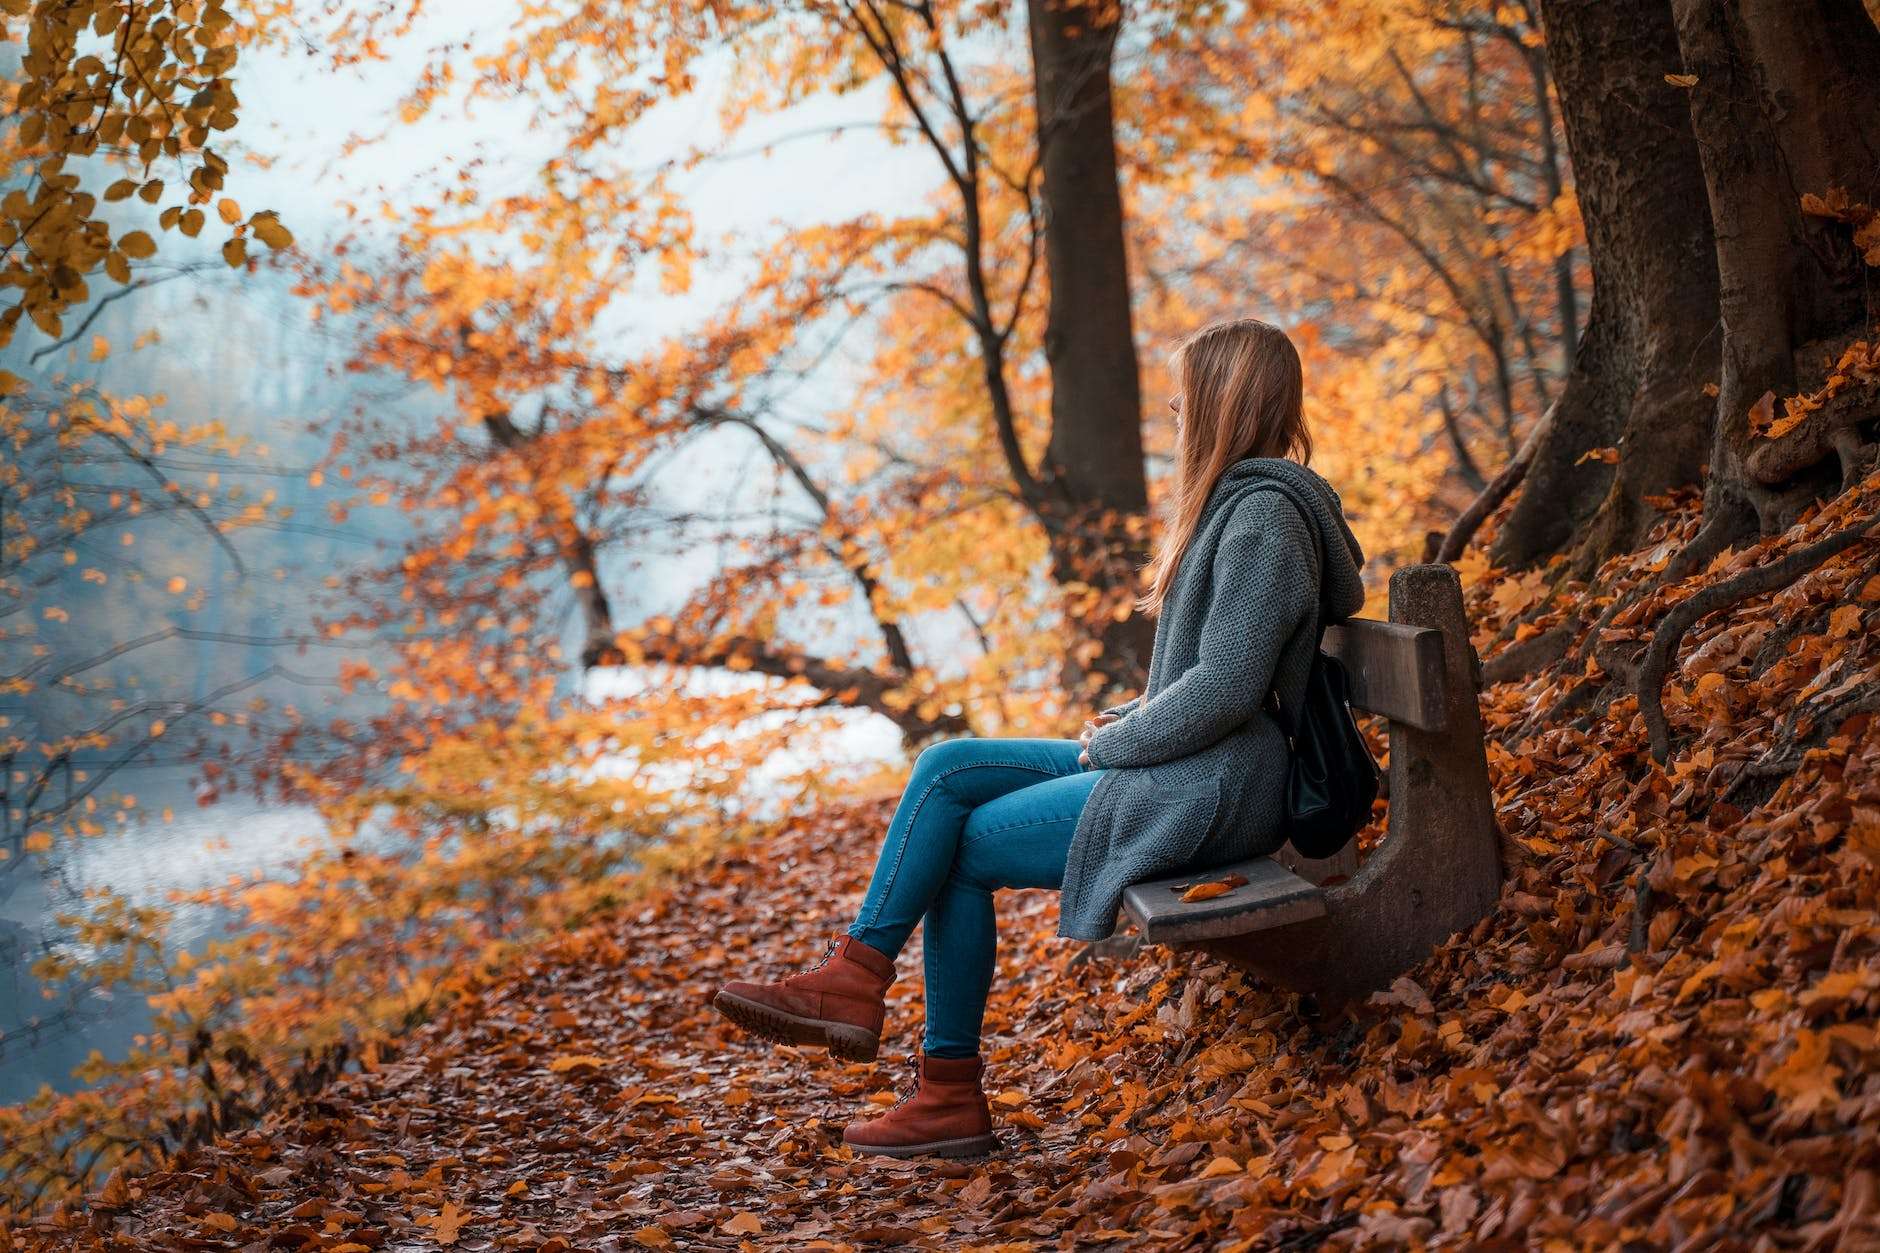 photo of woman sitting on wooden bench